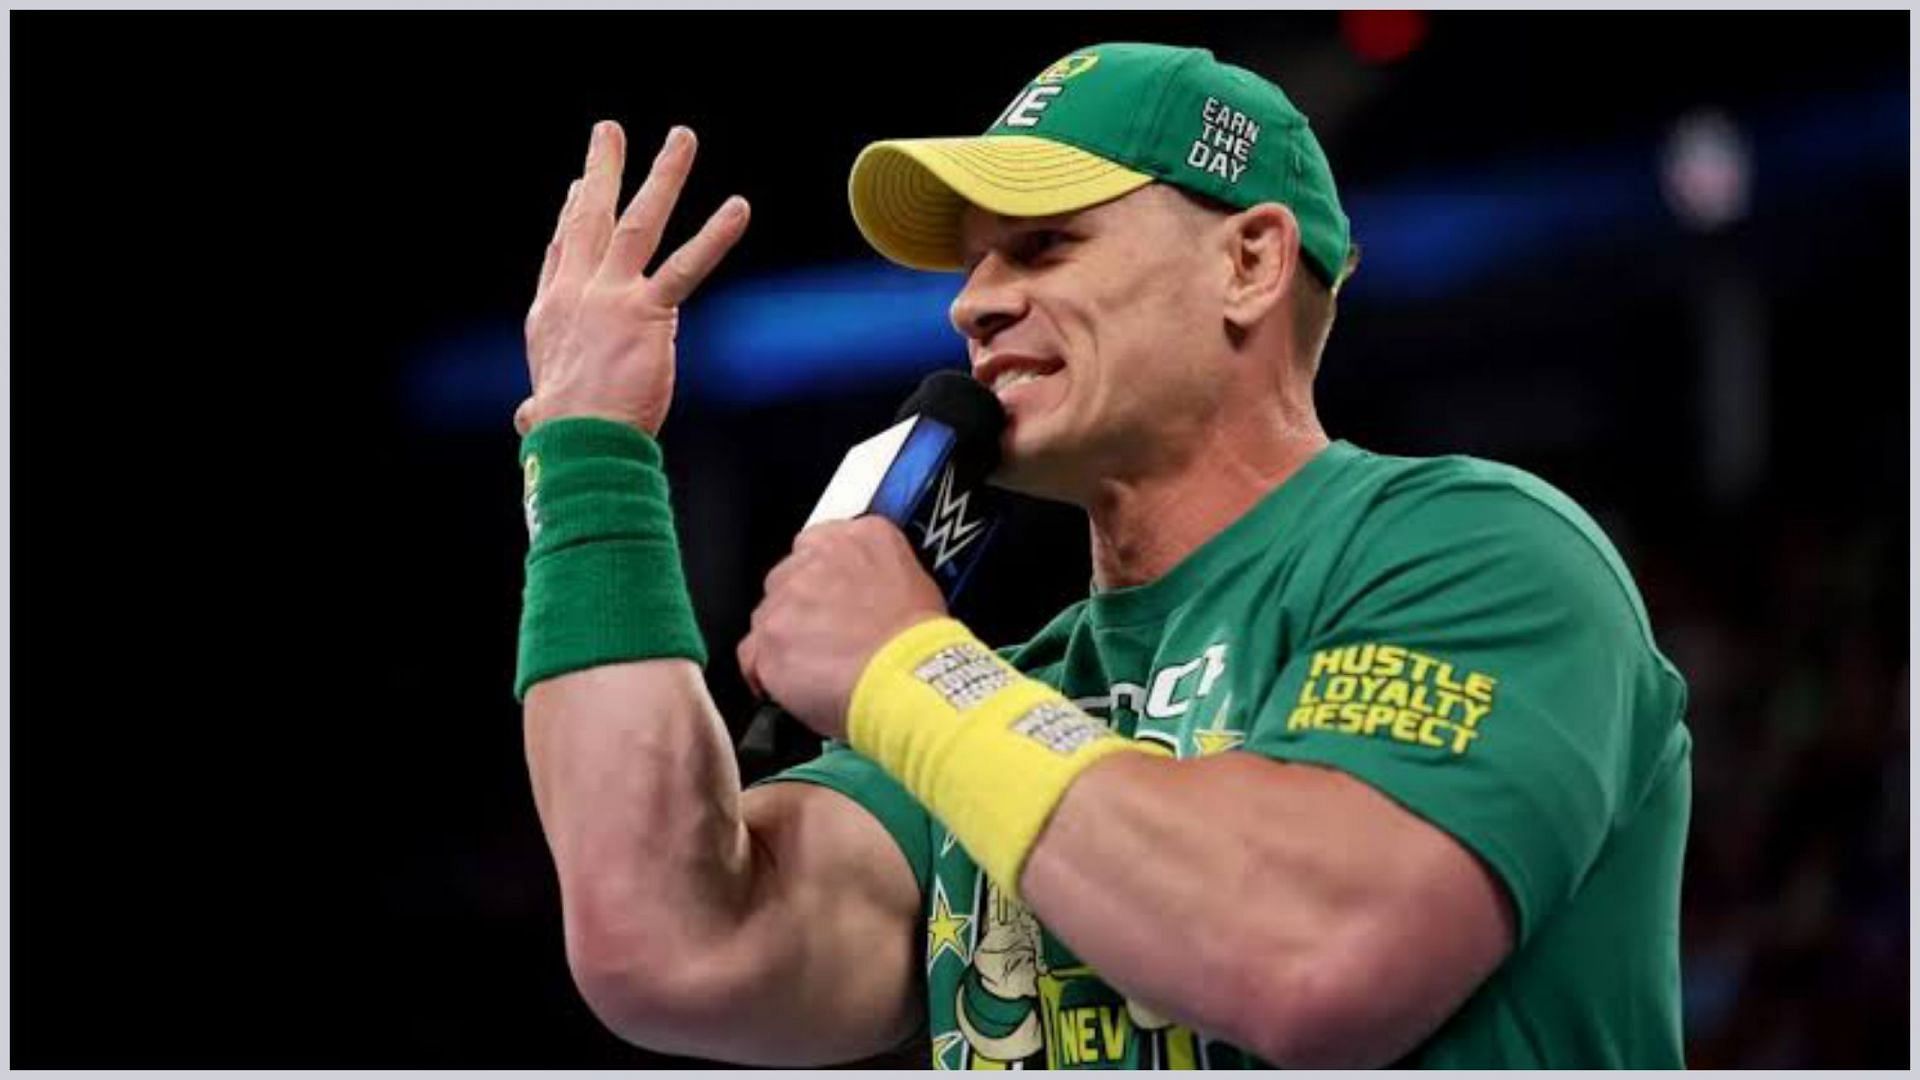 Cena is a 16-time WWE World Champion.